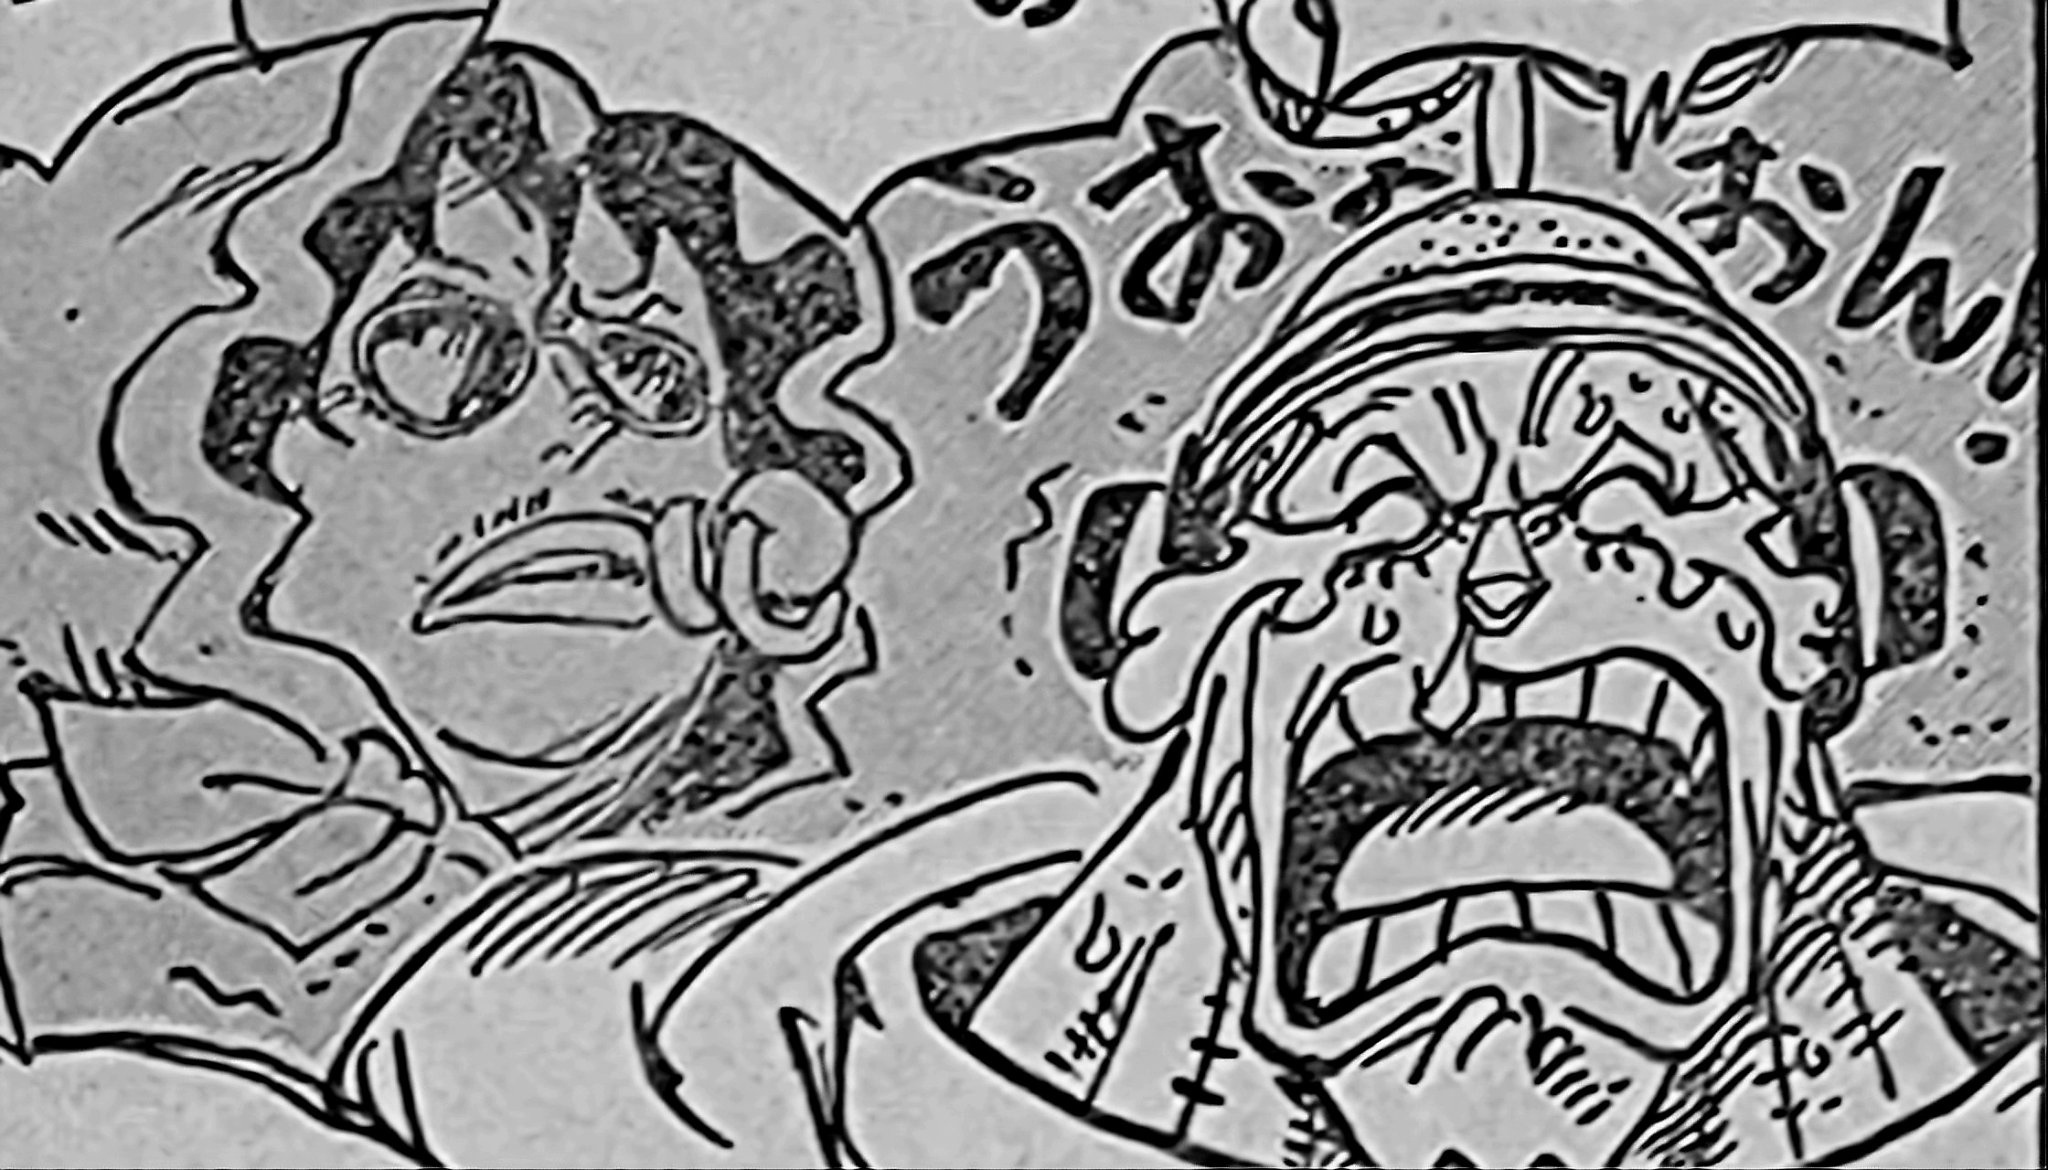 One Piece chapter 1065 (Initial Spoilers): A new Seraphim appears